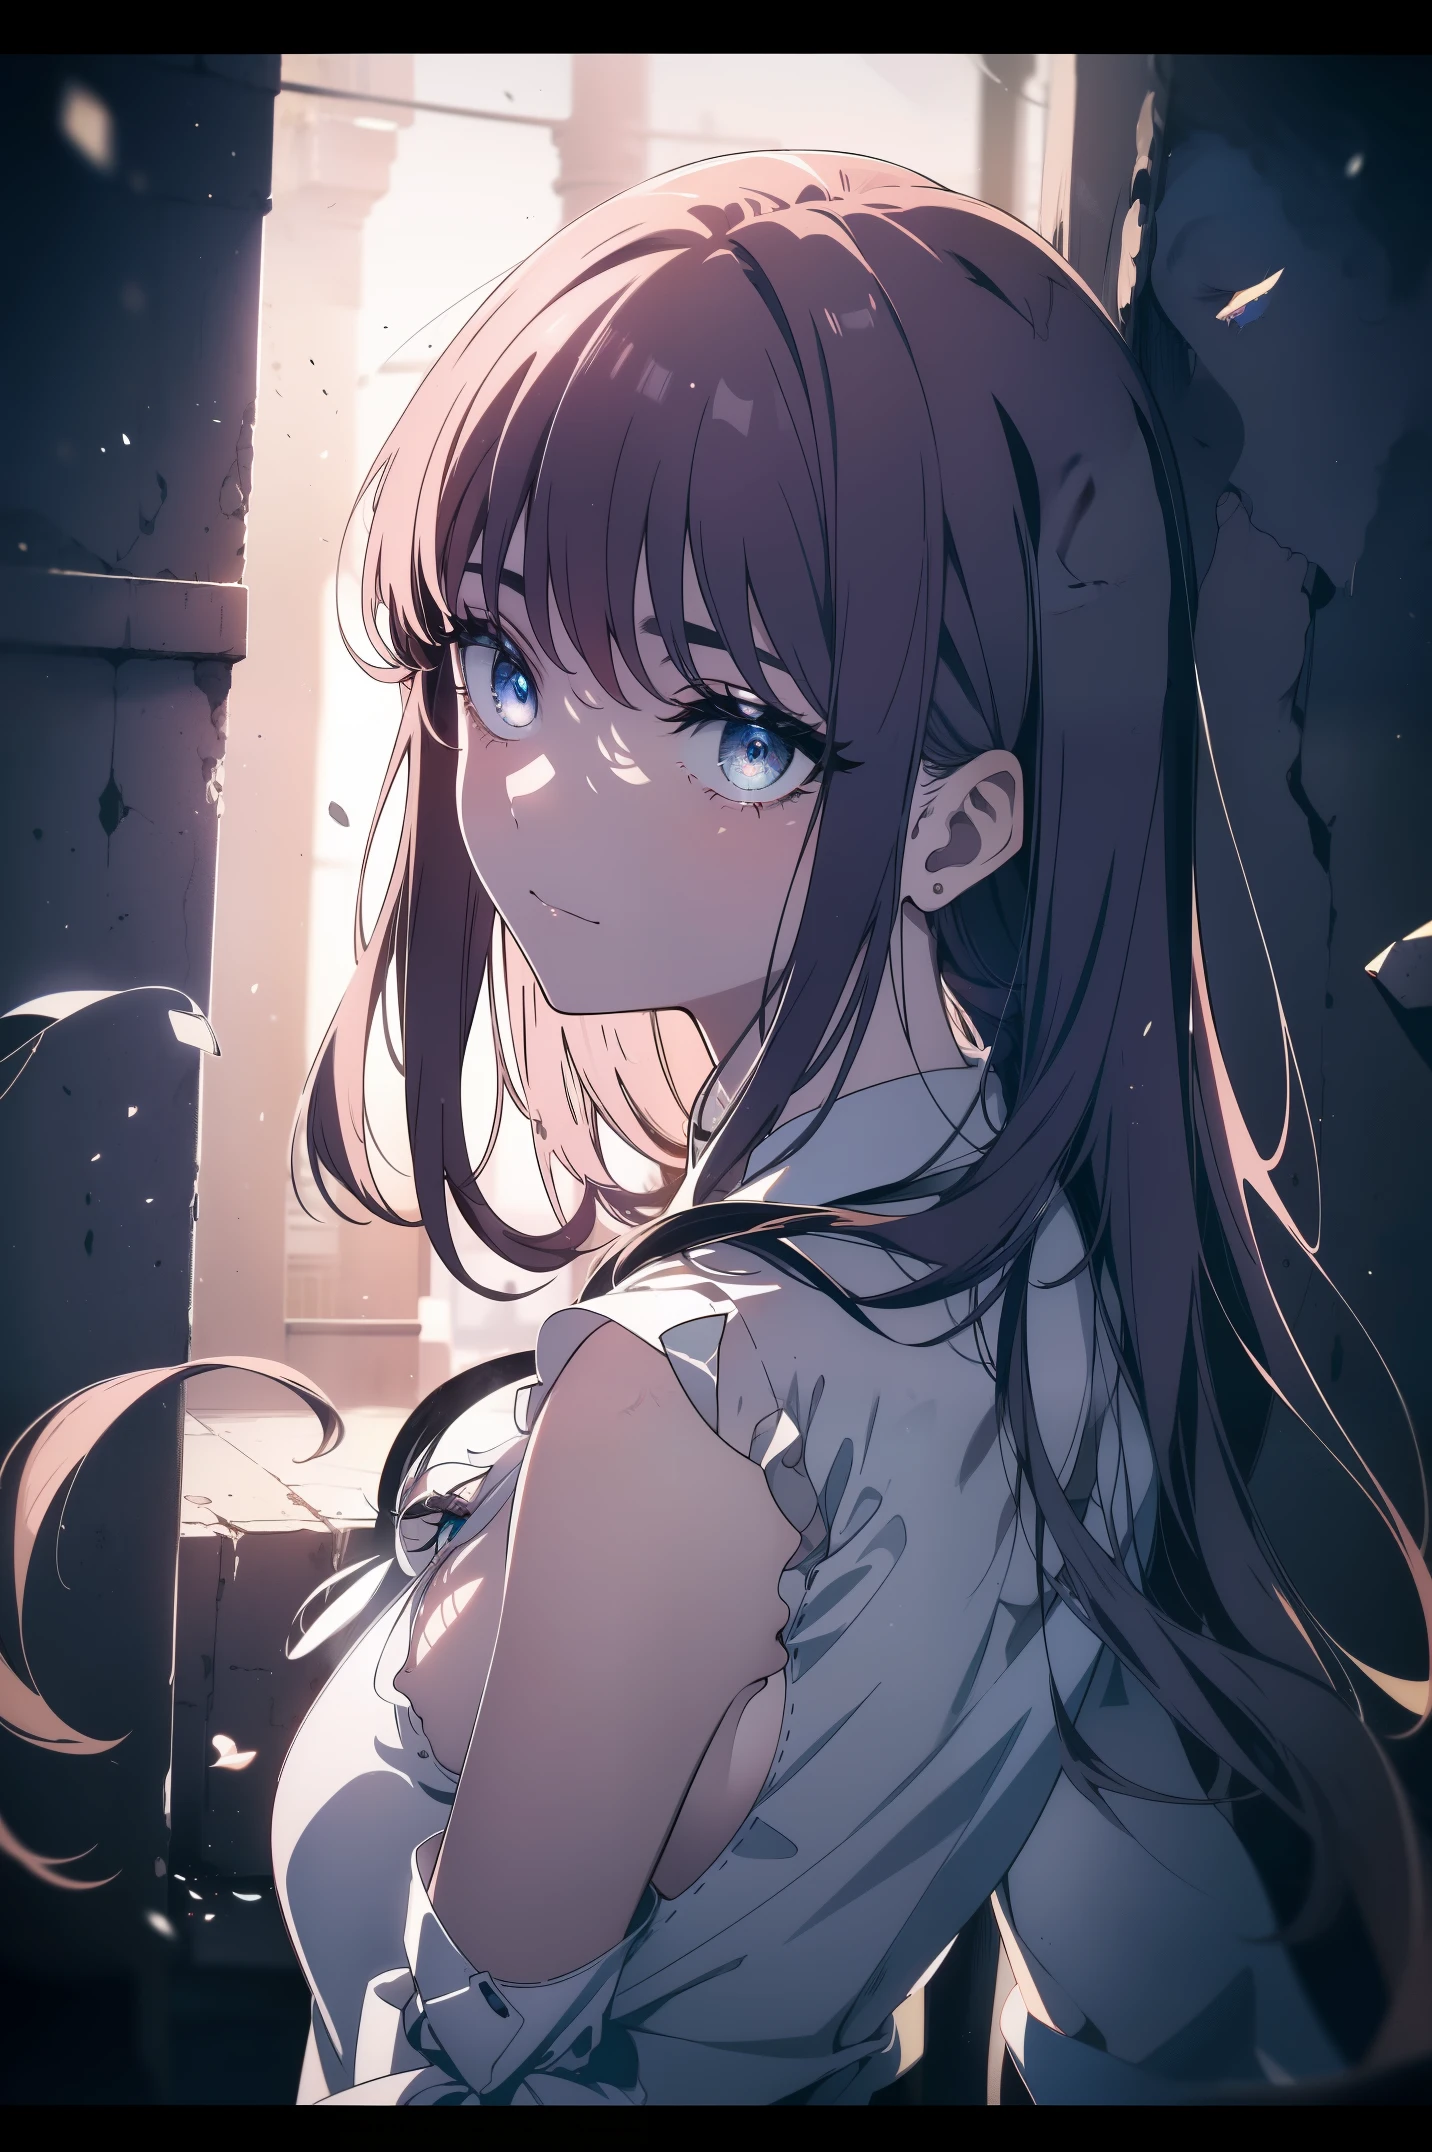 (masterpiece, best quality, ultra high resolution), 1 girl, permanent, Uniforms, white office shirt, black pleated skirt, ((light brown, light brown hair:0.7), cut long hair, pale skin, ((blue Eye)), luminescent_Eye, neon Eye, (ultra detailed Eye, Beautiful and detailed face, detailed Eye), ((center)), Smile, ((Wide-angle lens head)), for the audience, eye level, (blurry background, bright snowy background, winter), flat chest, looking at the audience, ((half closed Eye)), ((perfect hands)), (((head, arms, buttocks, Elbow, in sight))), ((Put your hands behind your back)), empty Eye, beautiful lights, external, outdoor, background, clear topic, 25 years old,